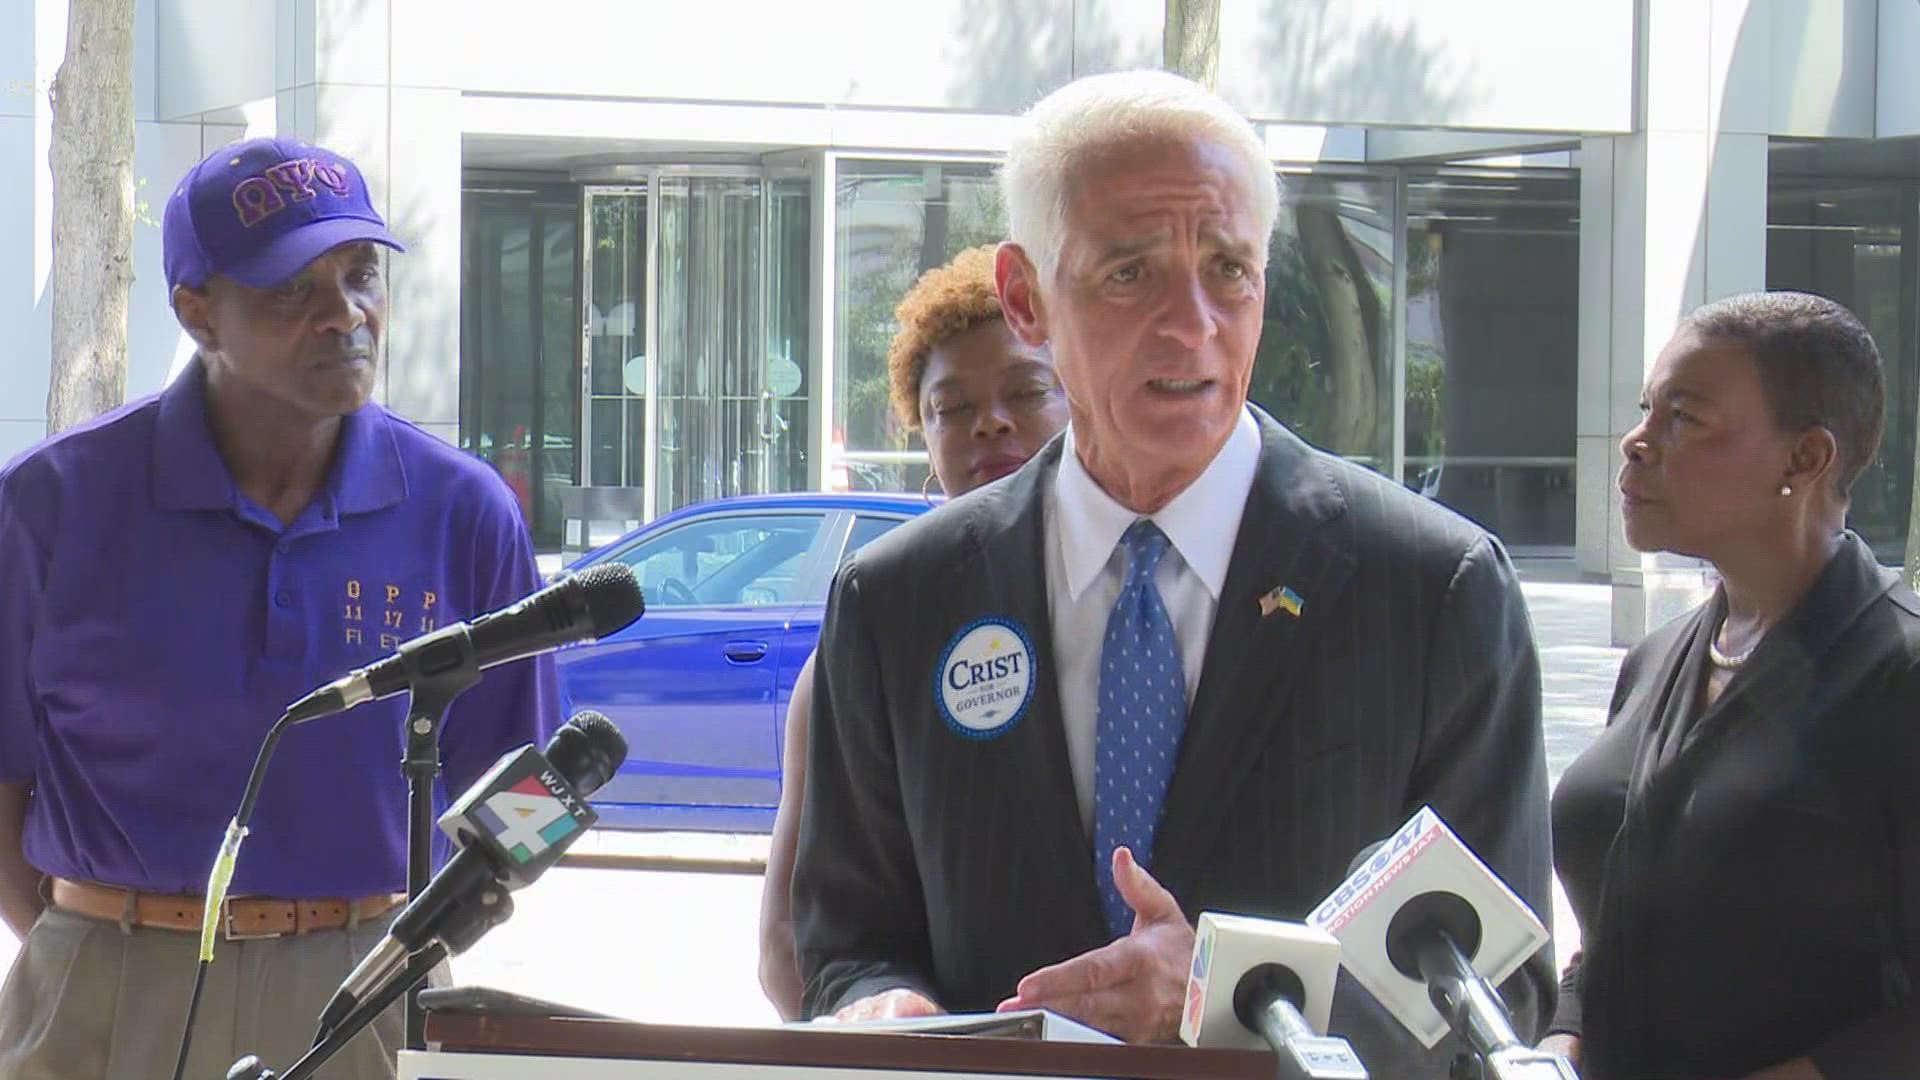 Crist explained his plan to handle the property insurance crisis if elected.